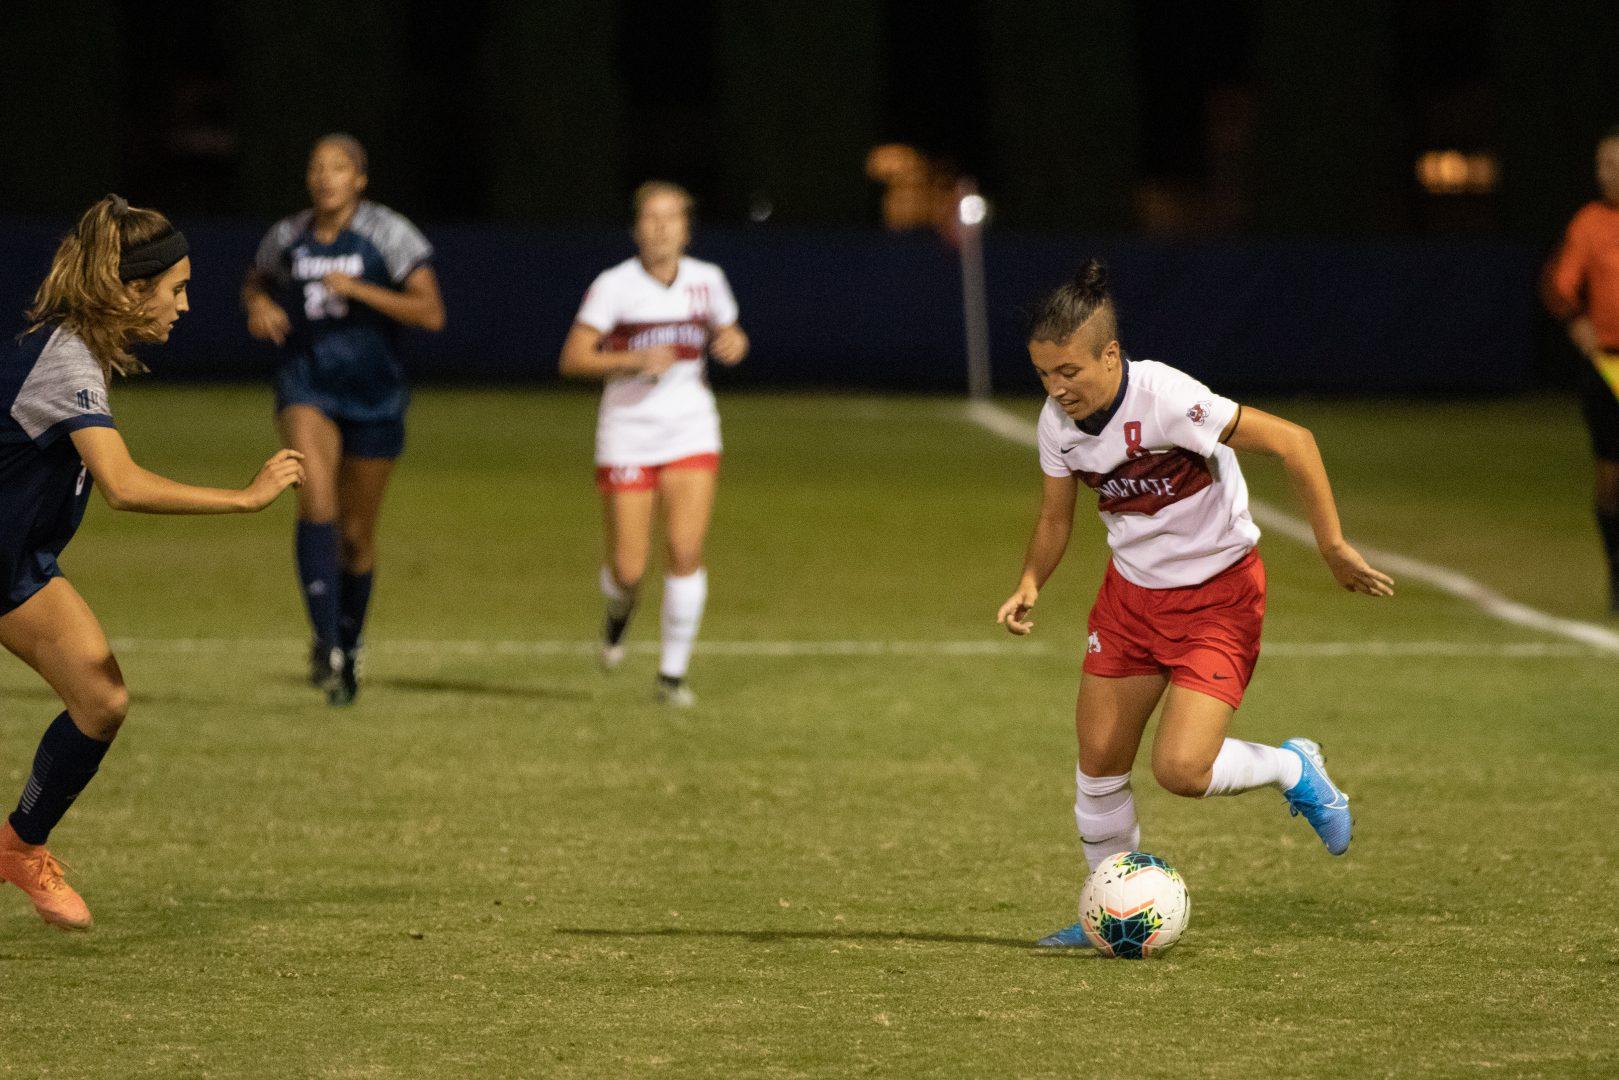 Fresno State midfielder Lorena Montanes takes on opponent during a home match against the University of Nevada Reno at the Soccer and Lacrosse Stadium on Thursday, Oct. 17, 2019. (Armando Carreno/The Collegian)